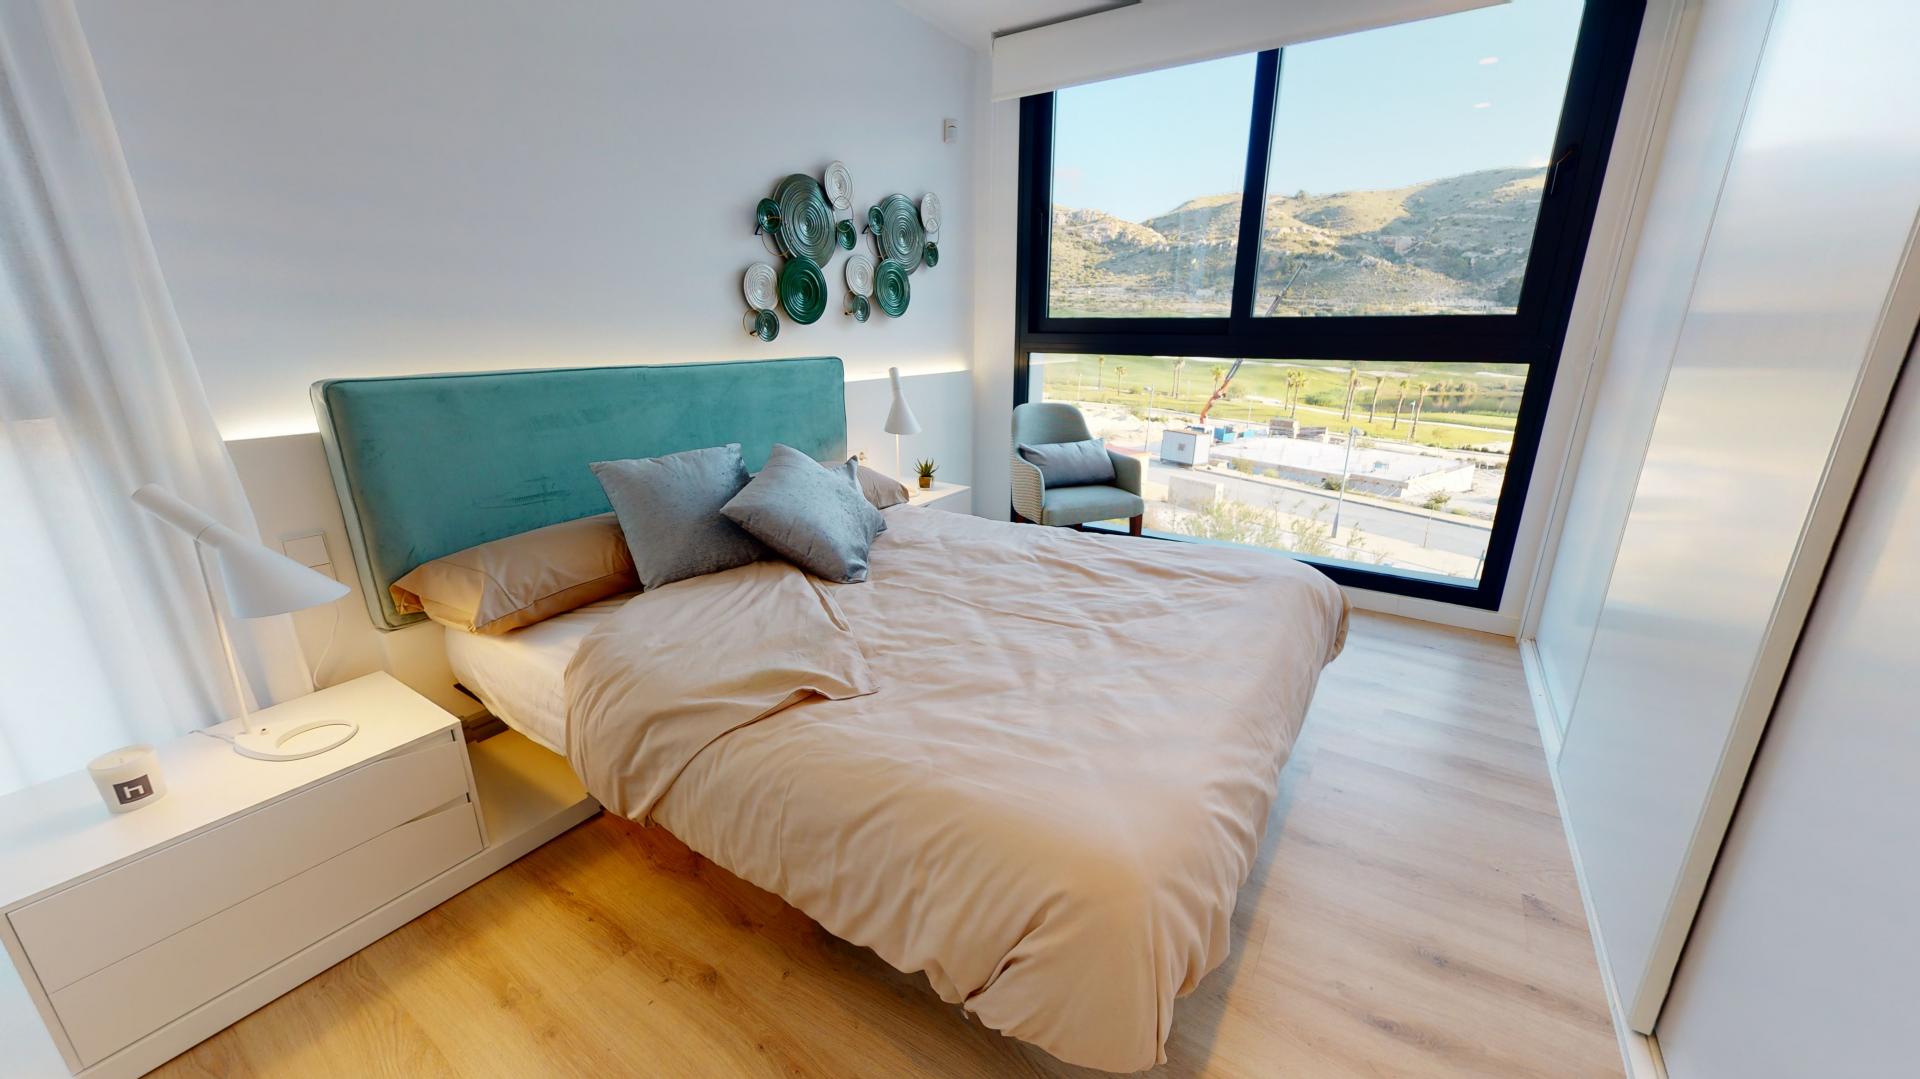 Duplex apartments with stunning golf & mountain views in Medvilla Spanje